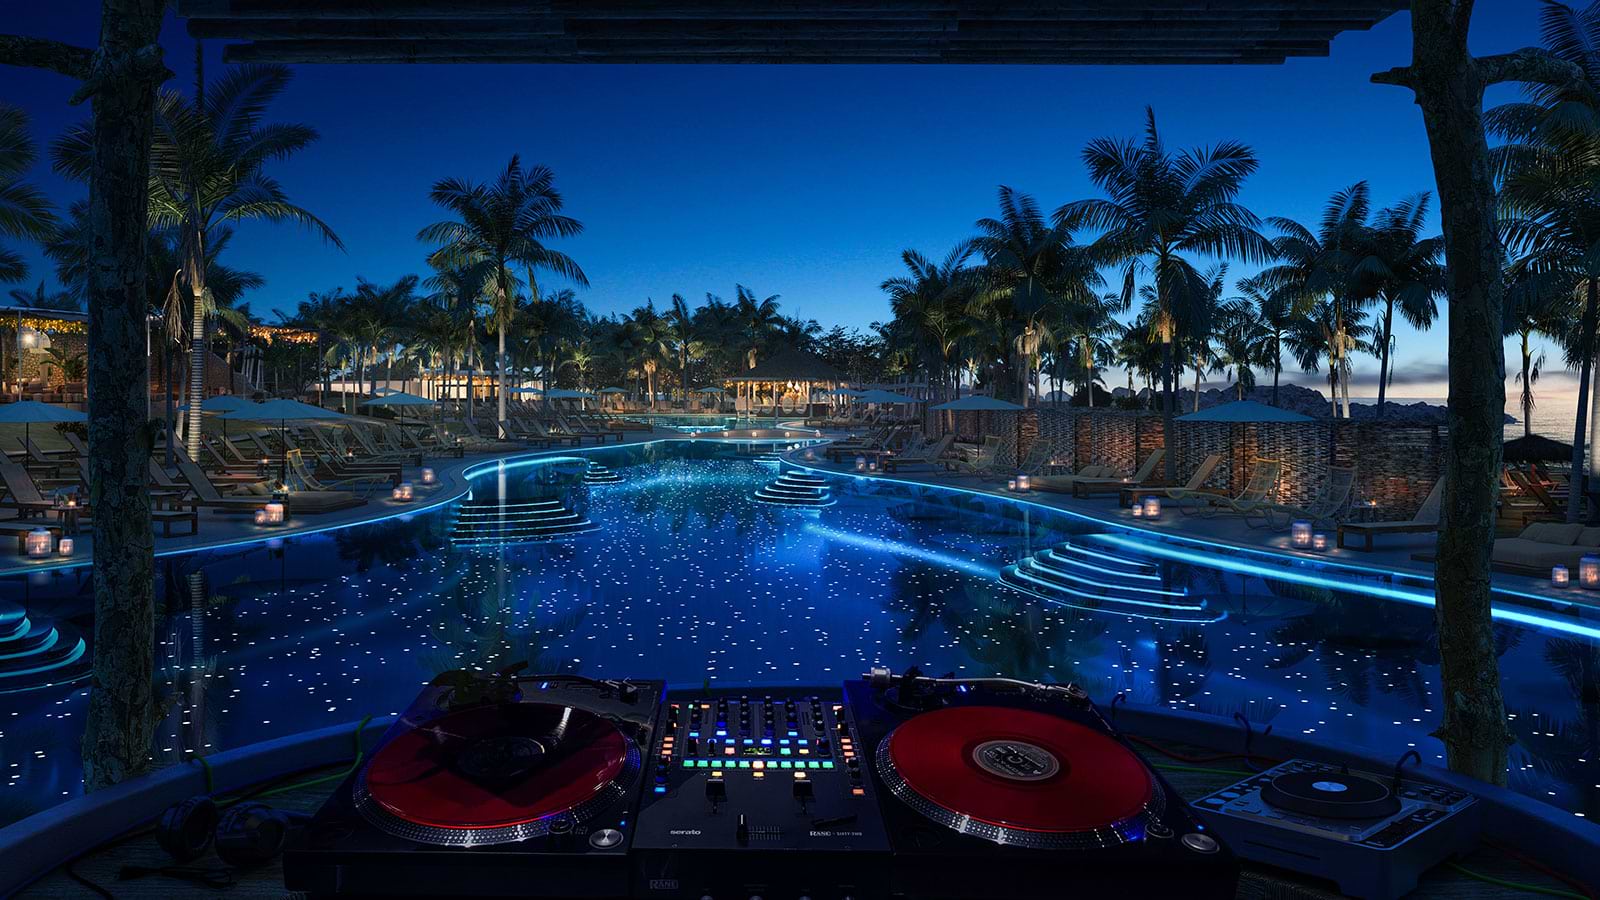 The Beach Club at Bimini's pool from the DJ booth